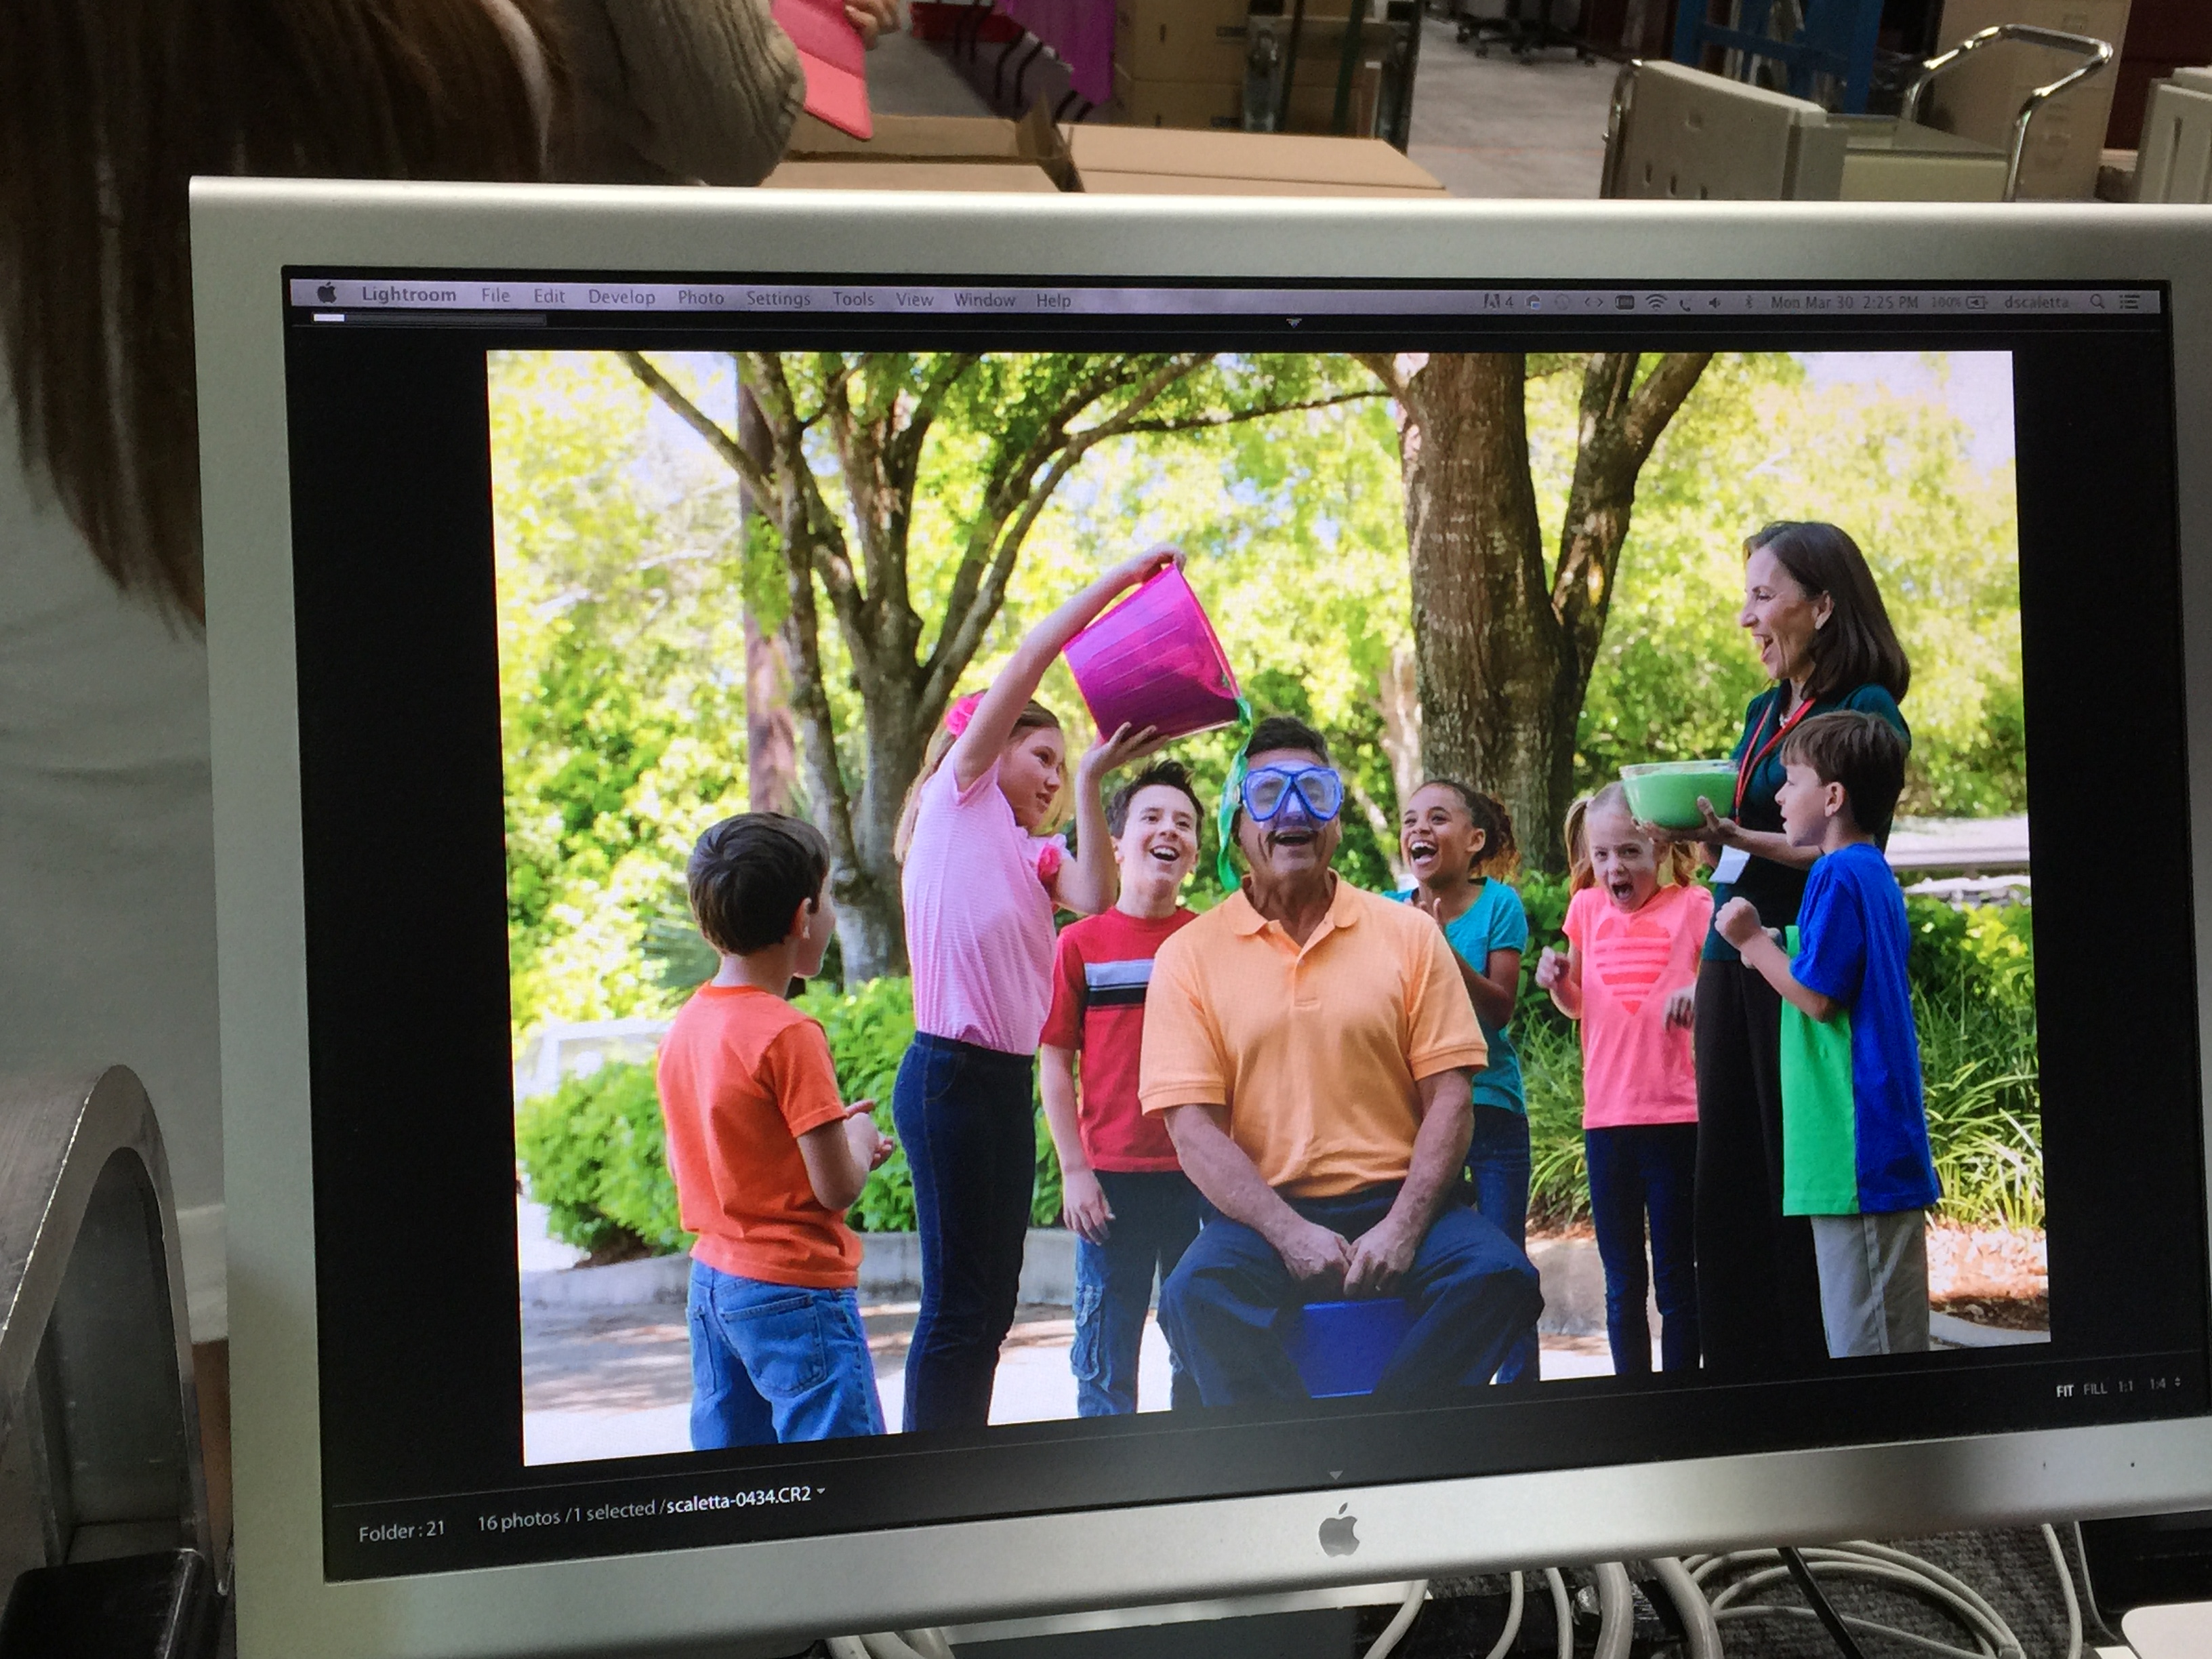 On the set of a Scholastic Books--Fall Print Shoot. Jordan is in the Red Shirt and his little brother, Christian is in the bright orange shirt.